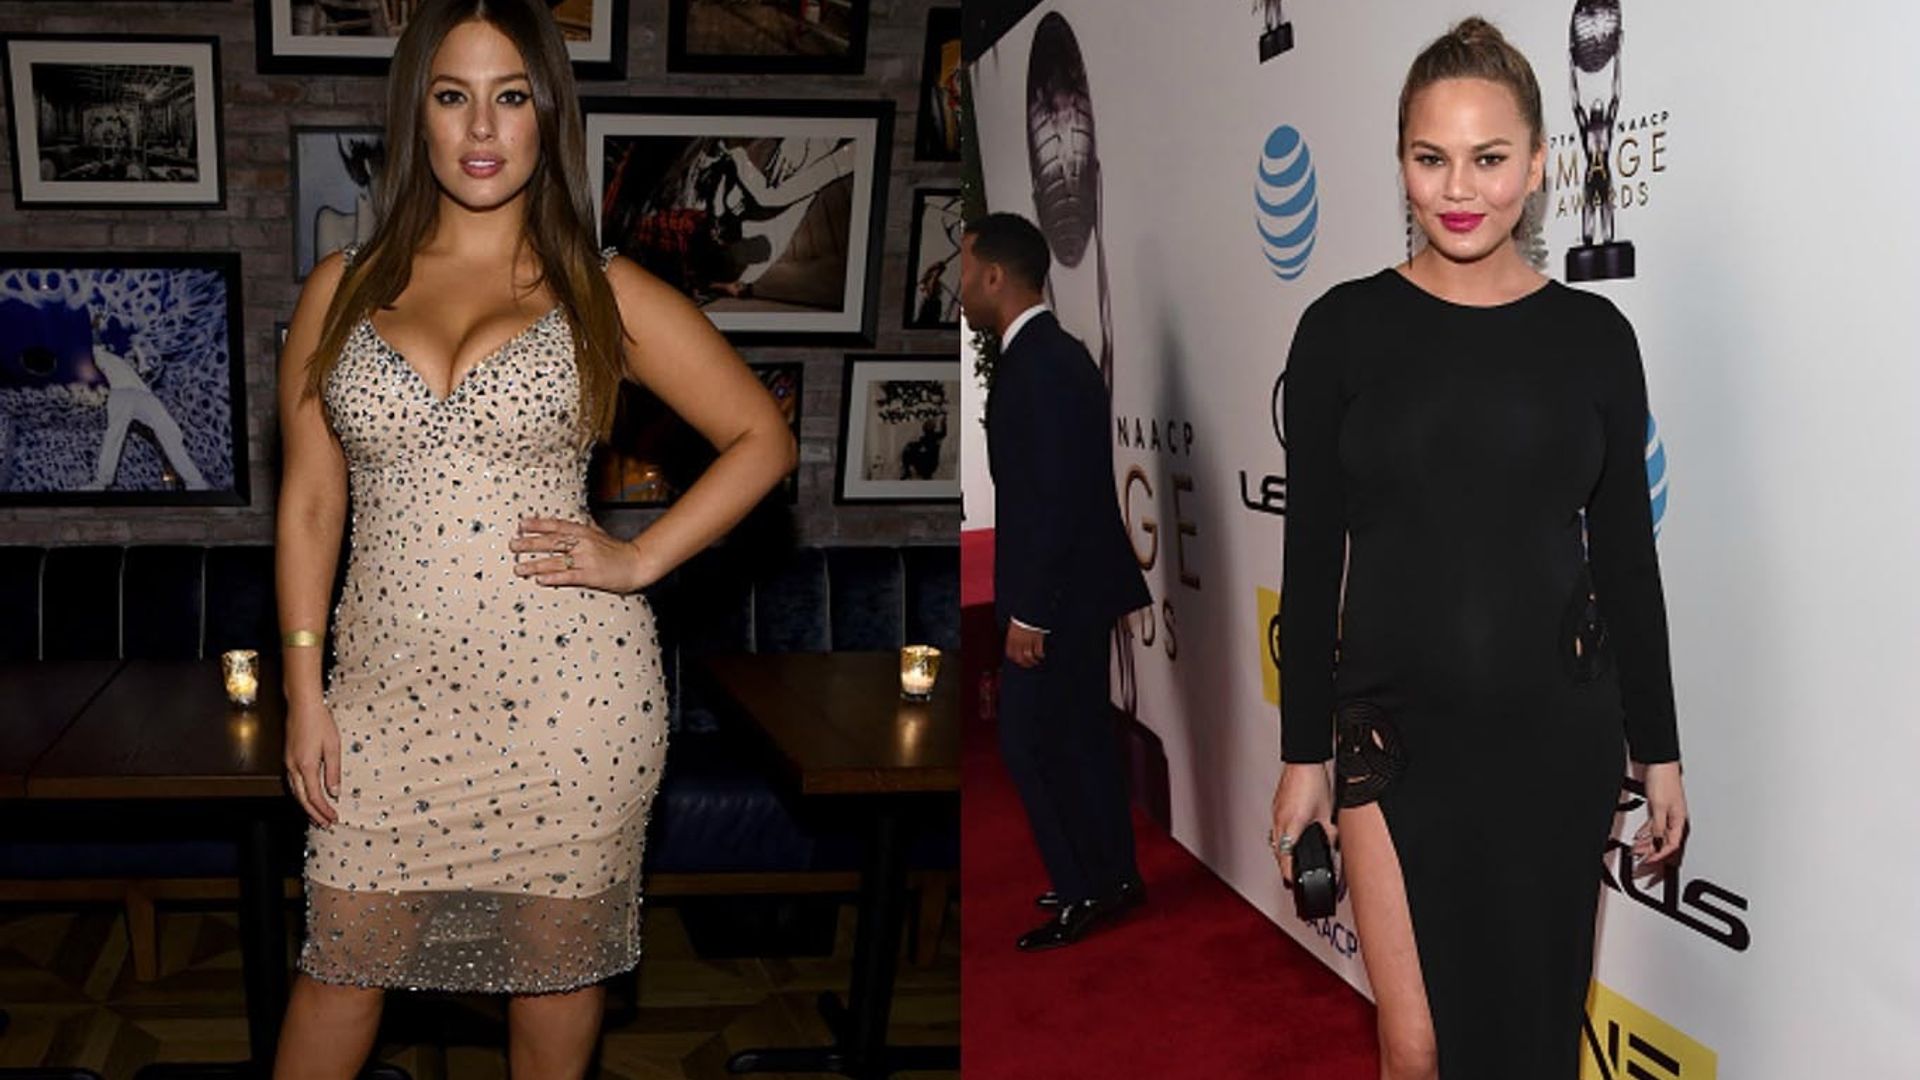 Sports Illustrated's Ashley Graham on looking up to Chrissy Teigen and practicing her 'Irina' pose